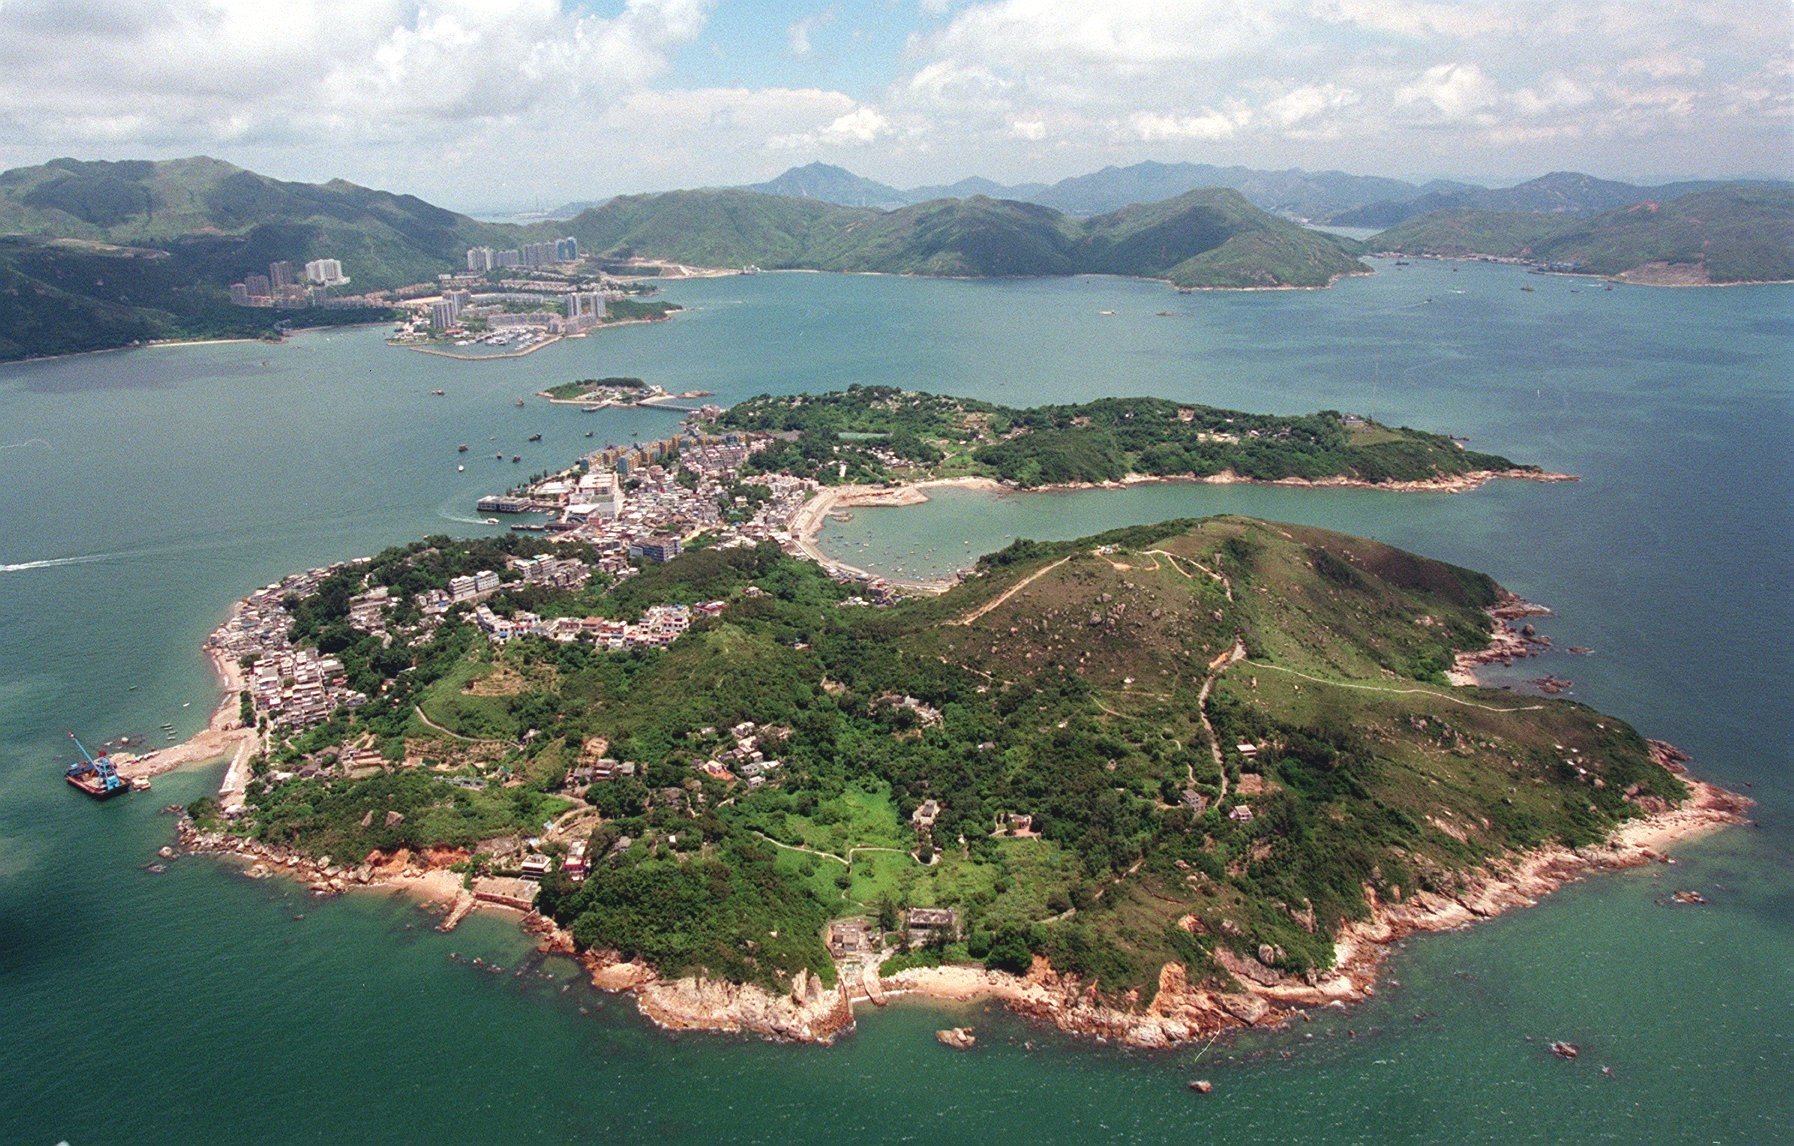 Peng Chau Island used to be a thriving industrial centre in the 1970s, with many factories. Photo: David Wong